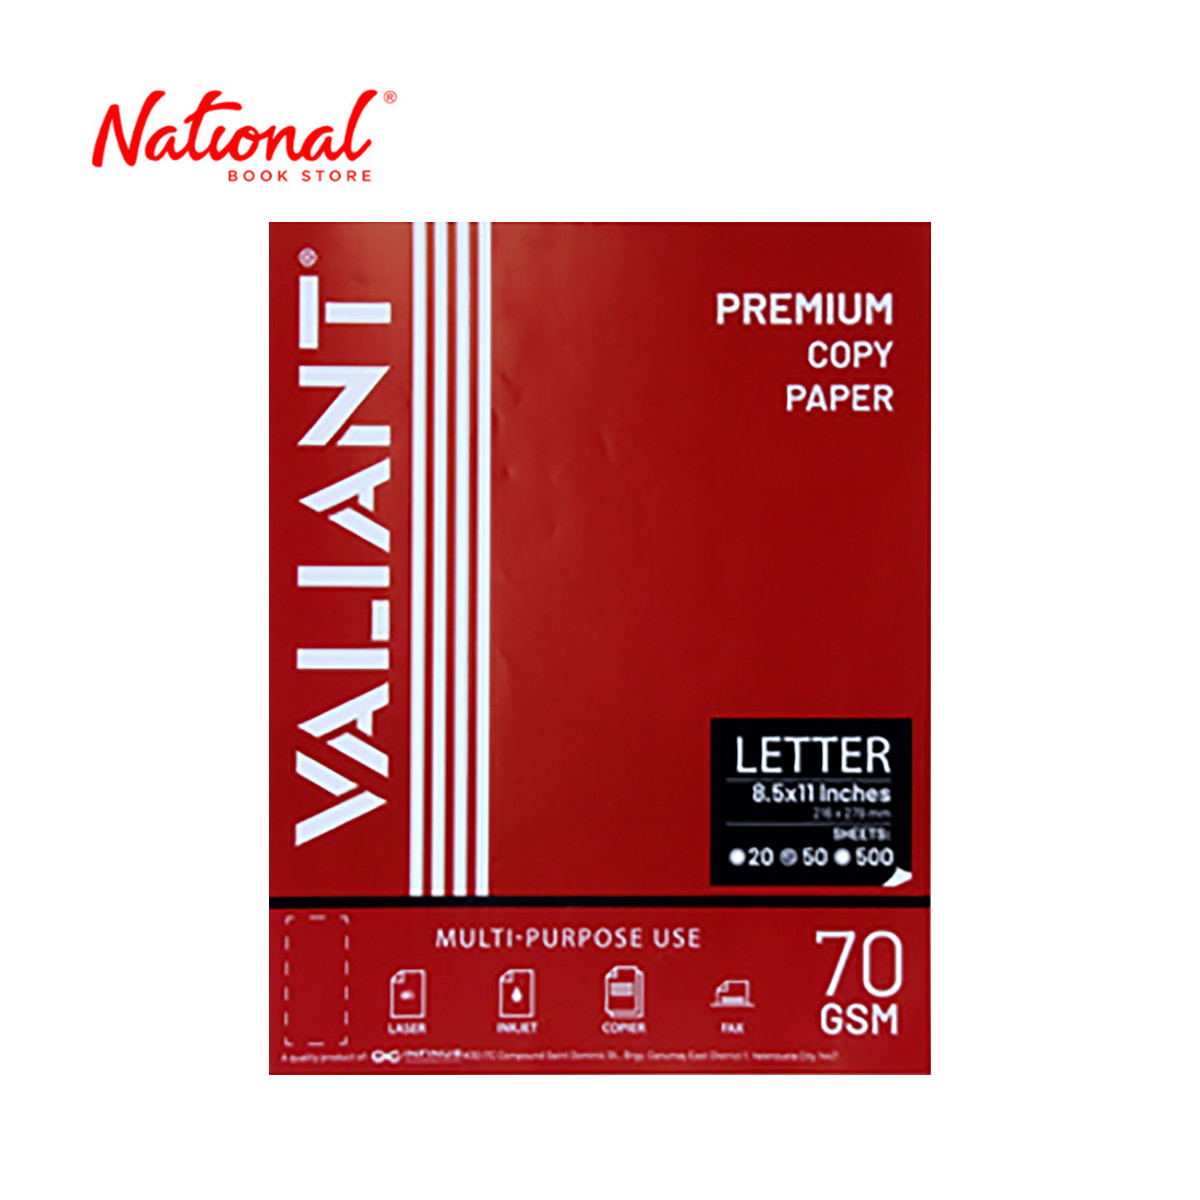 Valiant Typewriting Paper Short 20's 70gsm - School & Office Supplies - Copy Paper